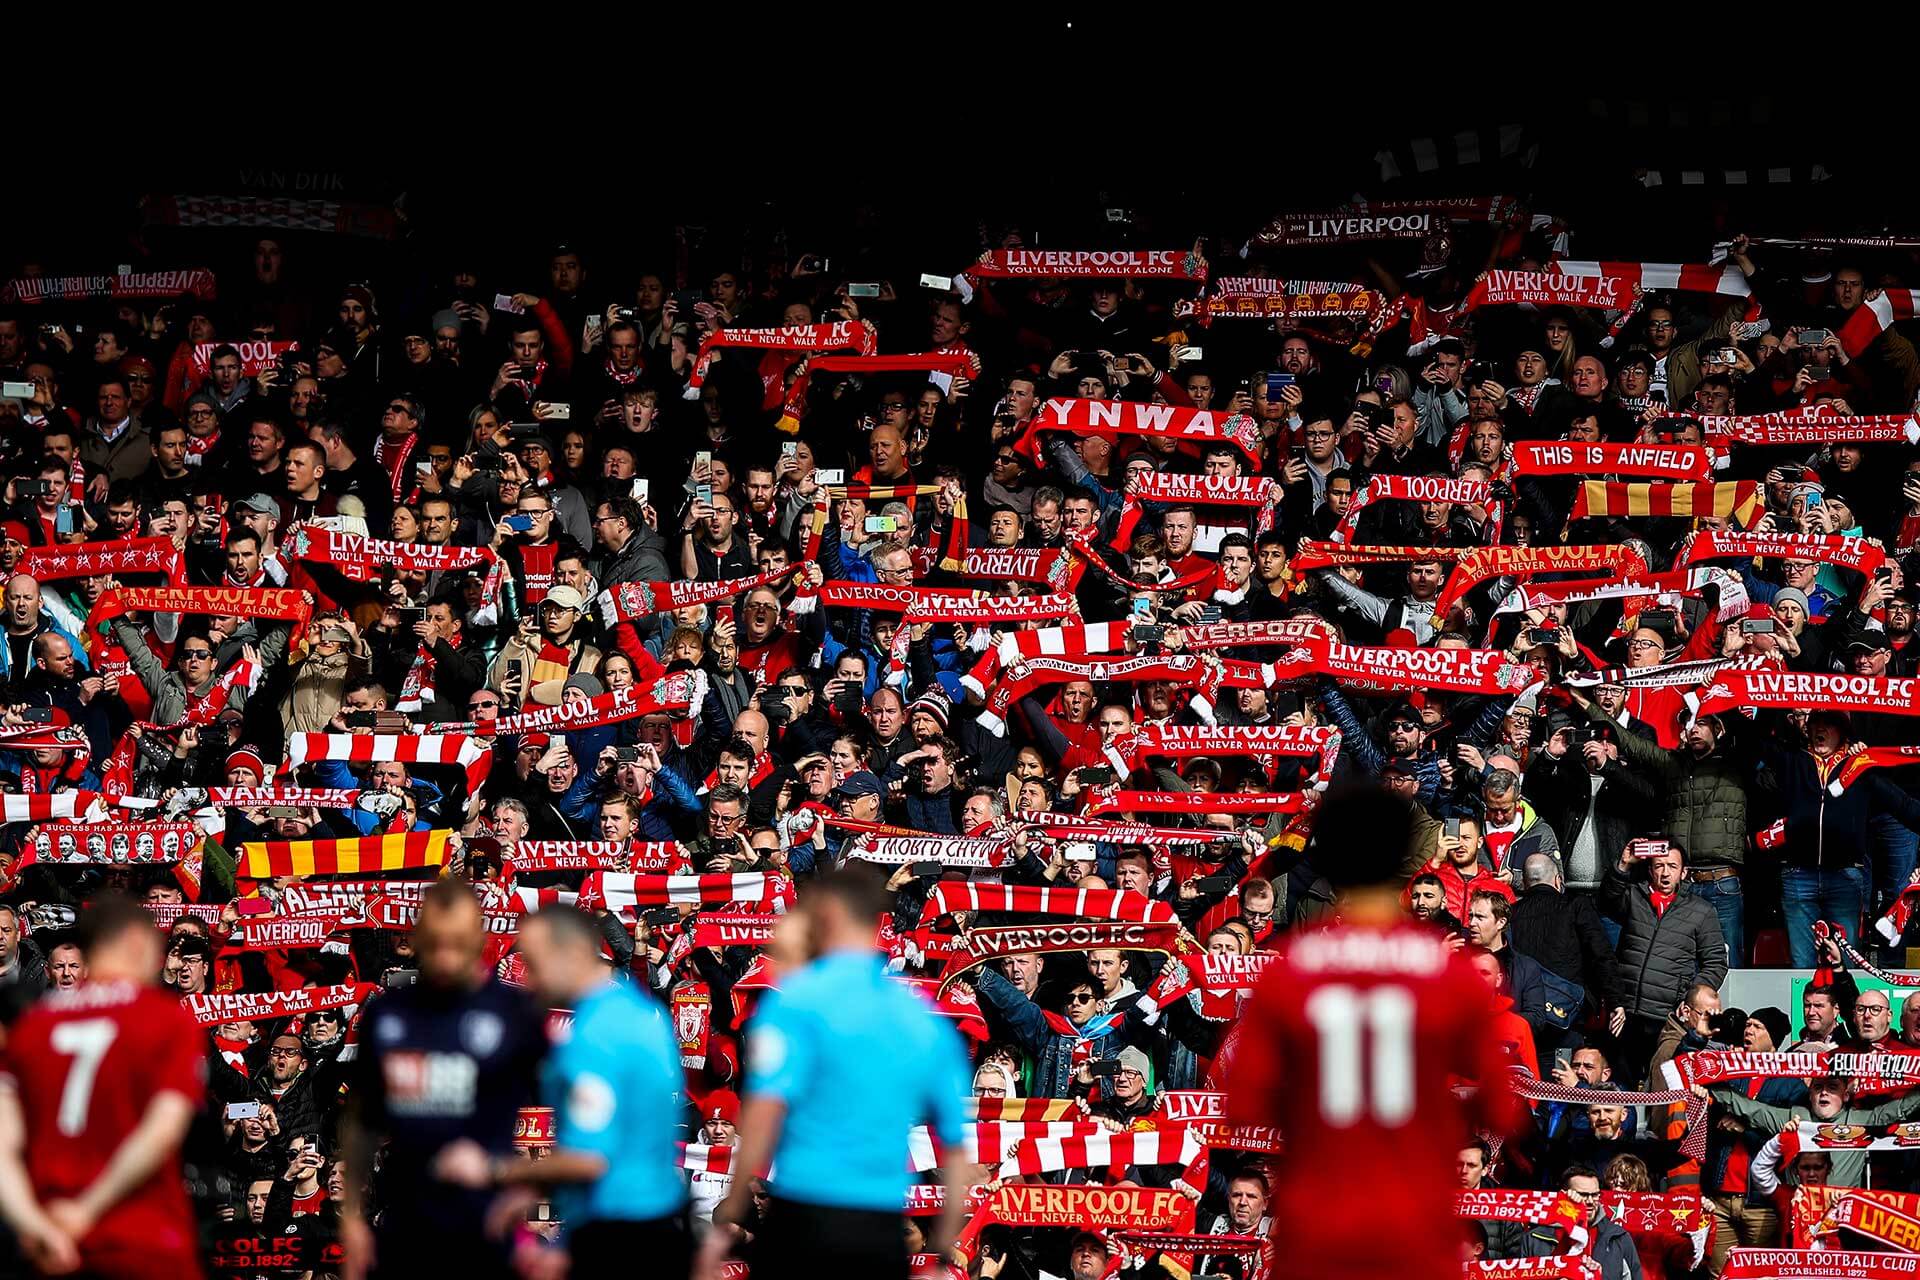 Liverpool: The agonizing wait for a first Premier League title